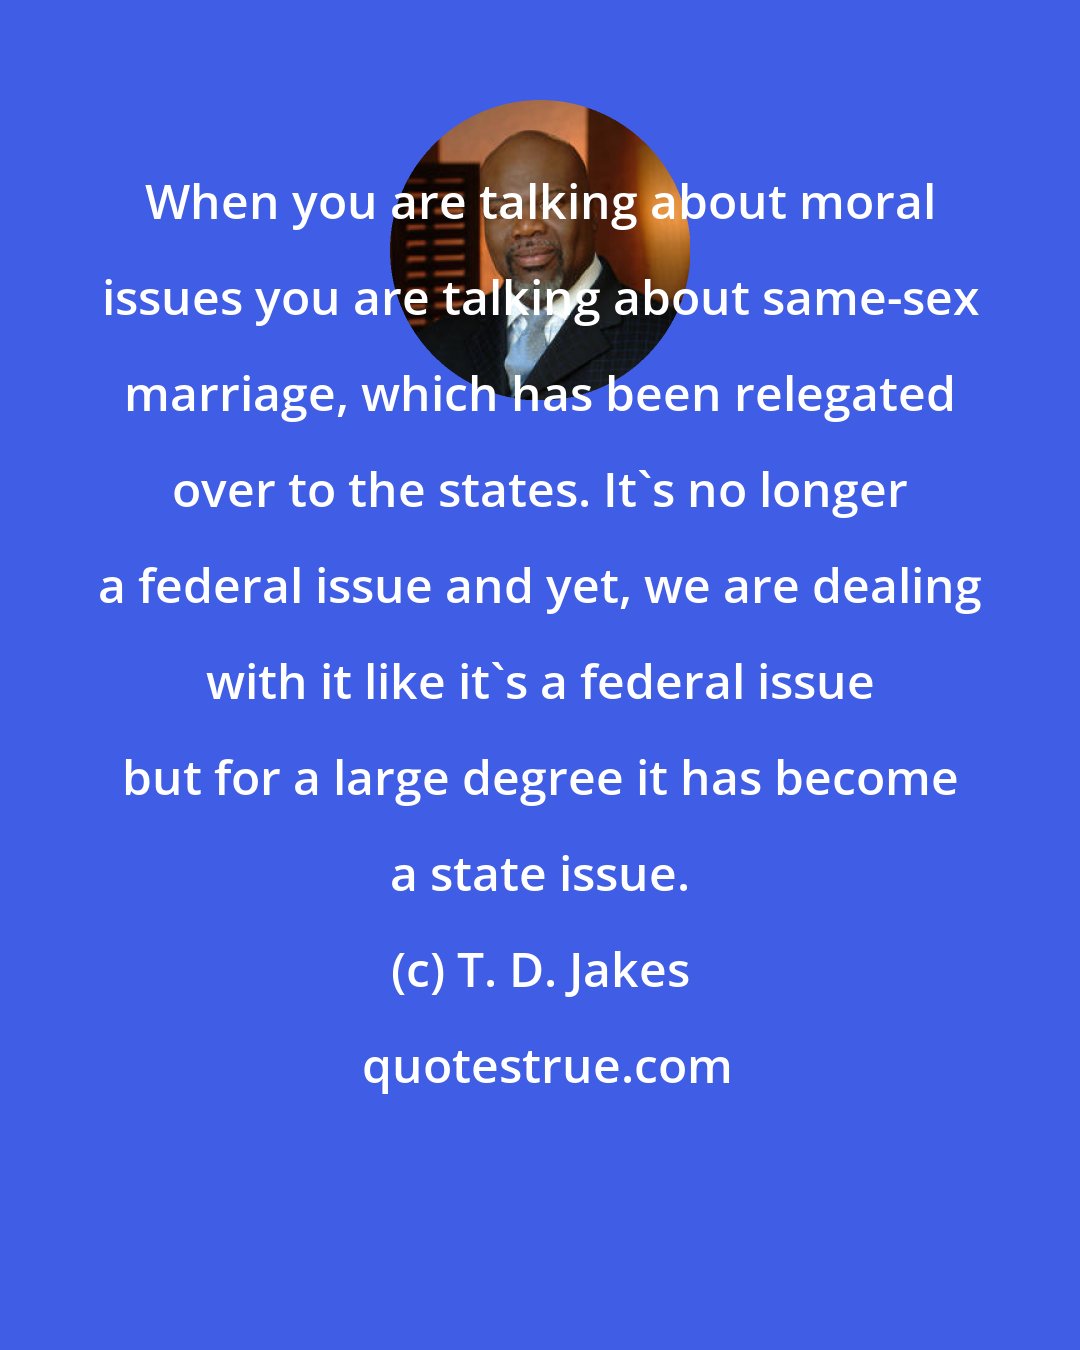 T. D. Jakes: When you are talking about moral issues you are talking about same-sex marriage, which has been relegated over to the states. It's no longer a federal issue and yet, we are dealing with it like it's a federal issue but for a large degree it has become a state issue.